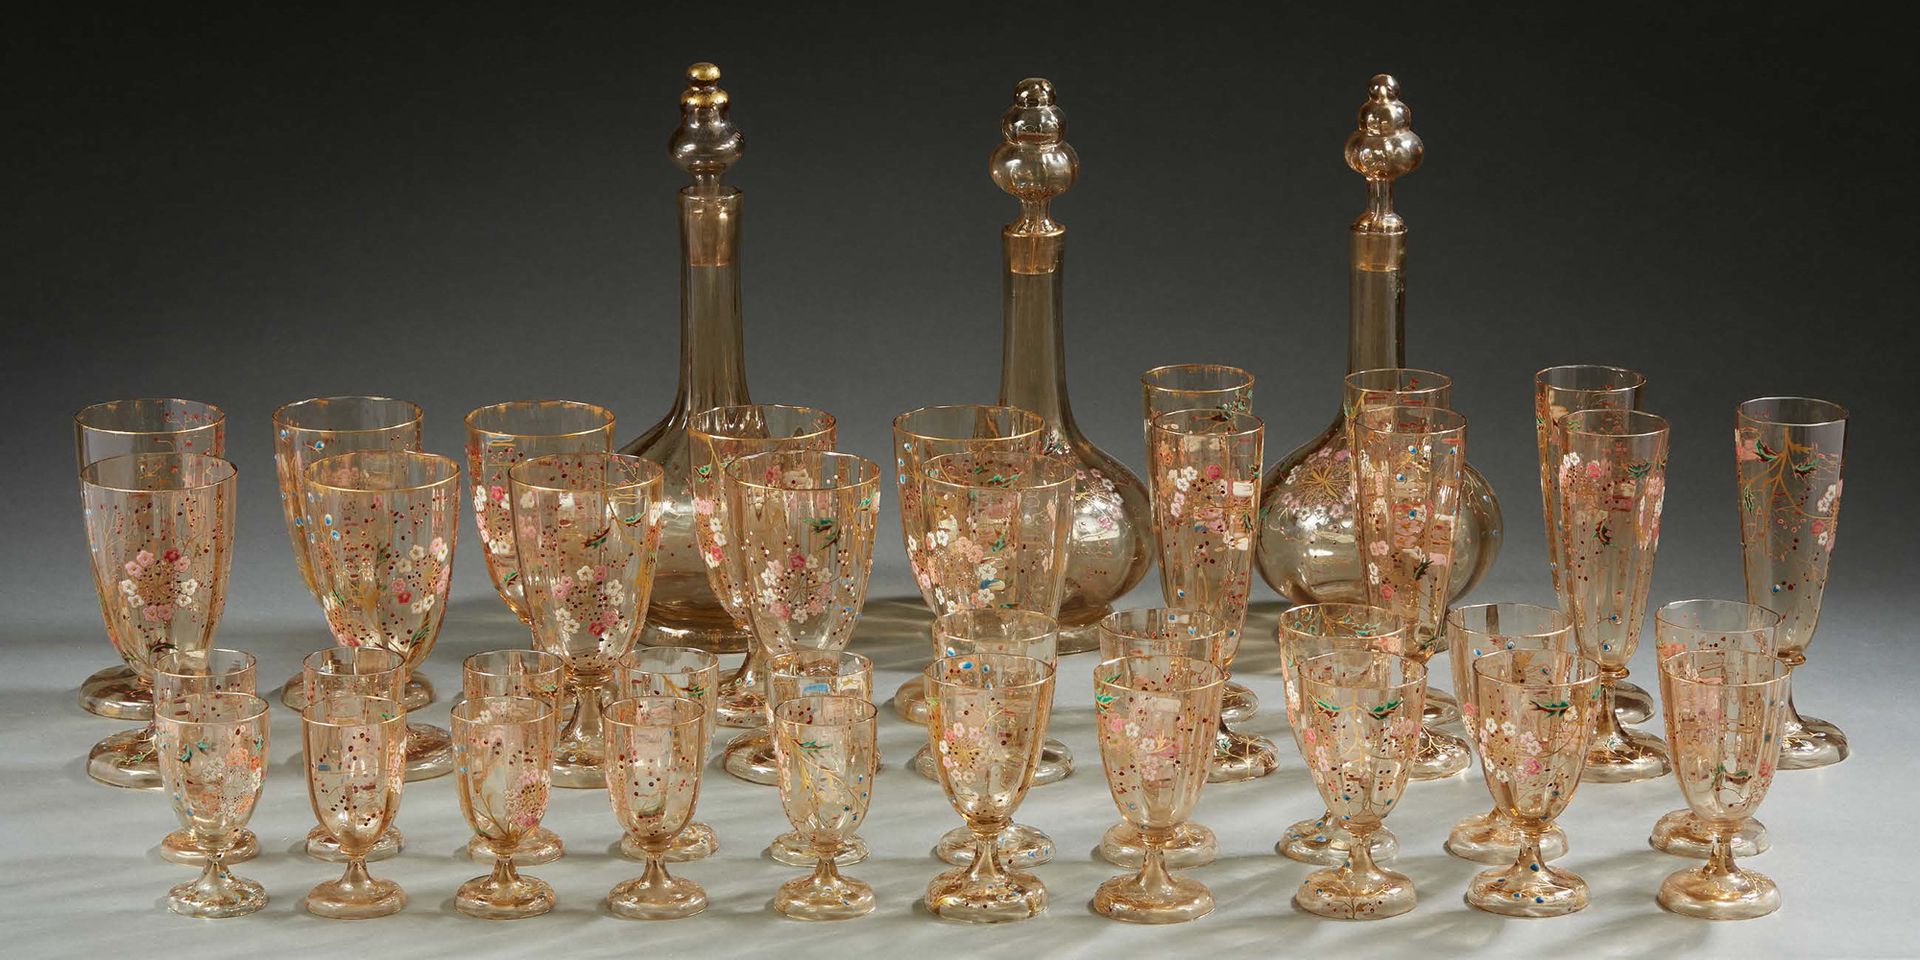 Émile GALLÉ (1846-1904) Table service consisting of three carafes with their sto&hellip;